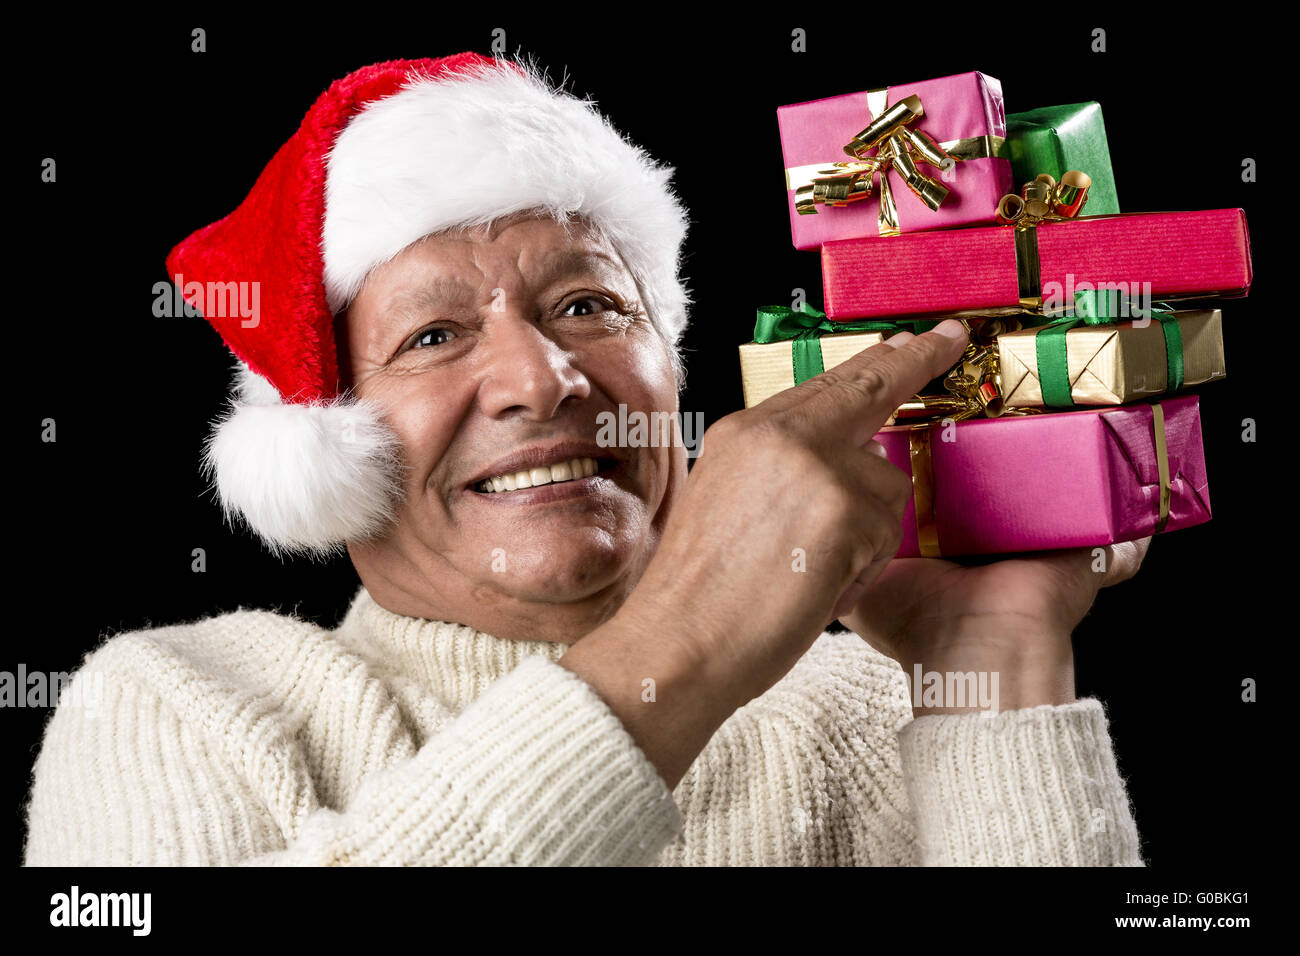 Male Senior Firmly Pointing At Six Wrapped Gifts Stock Photo